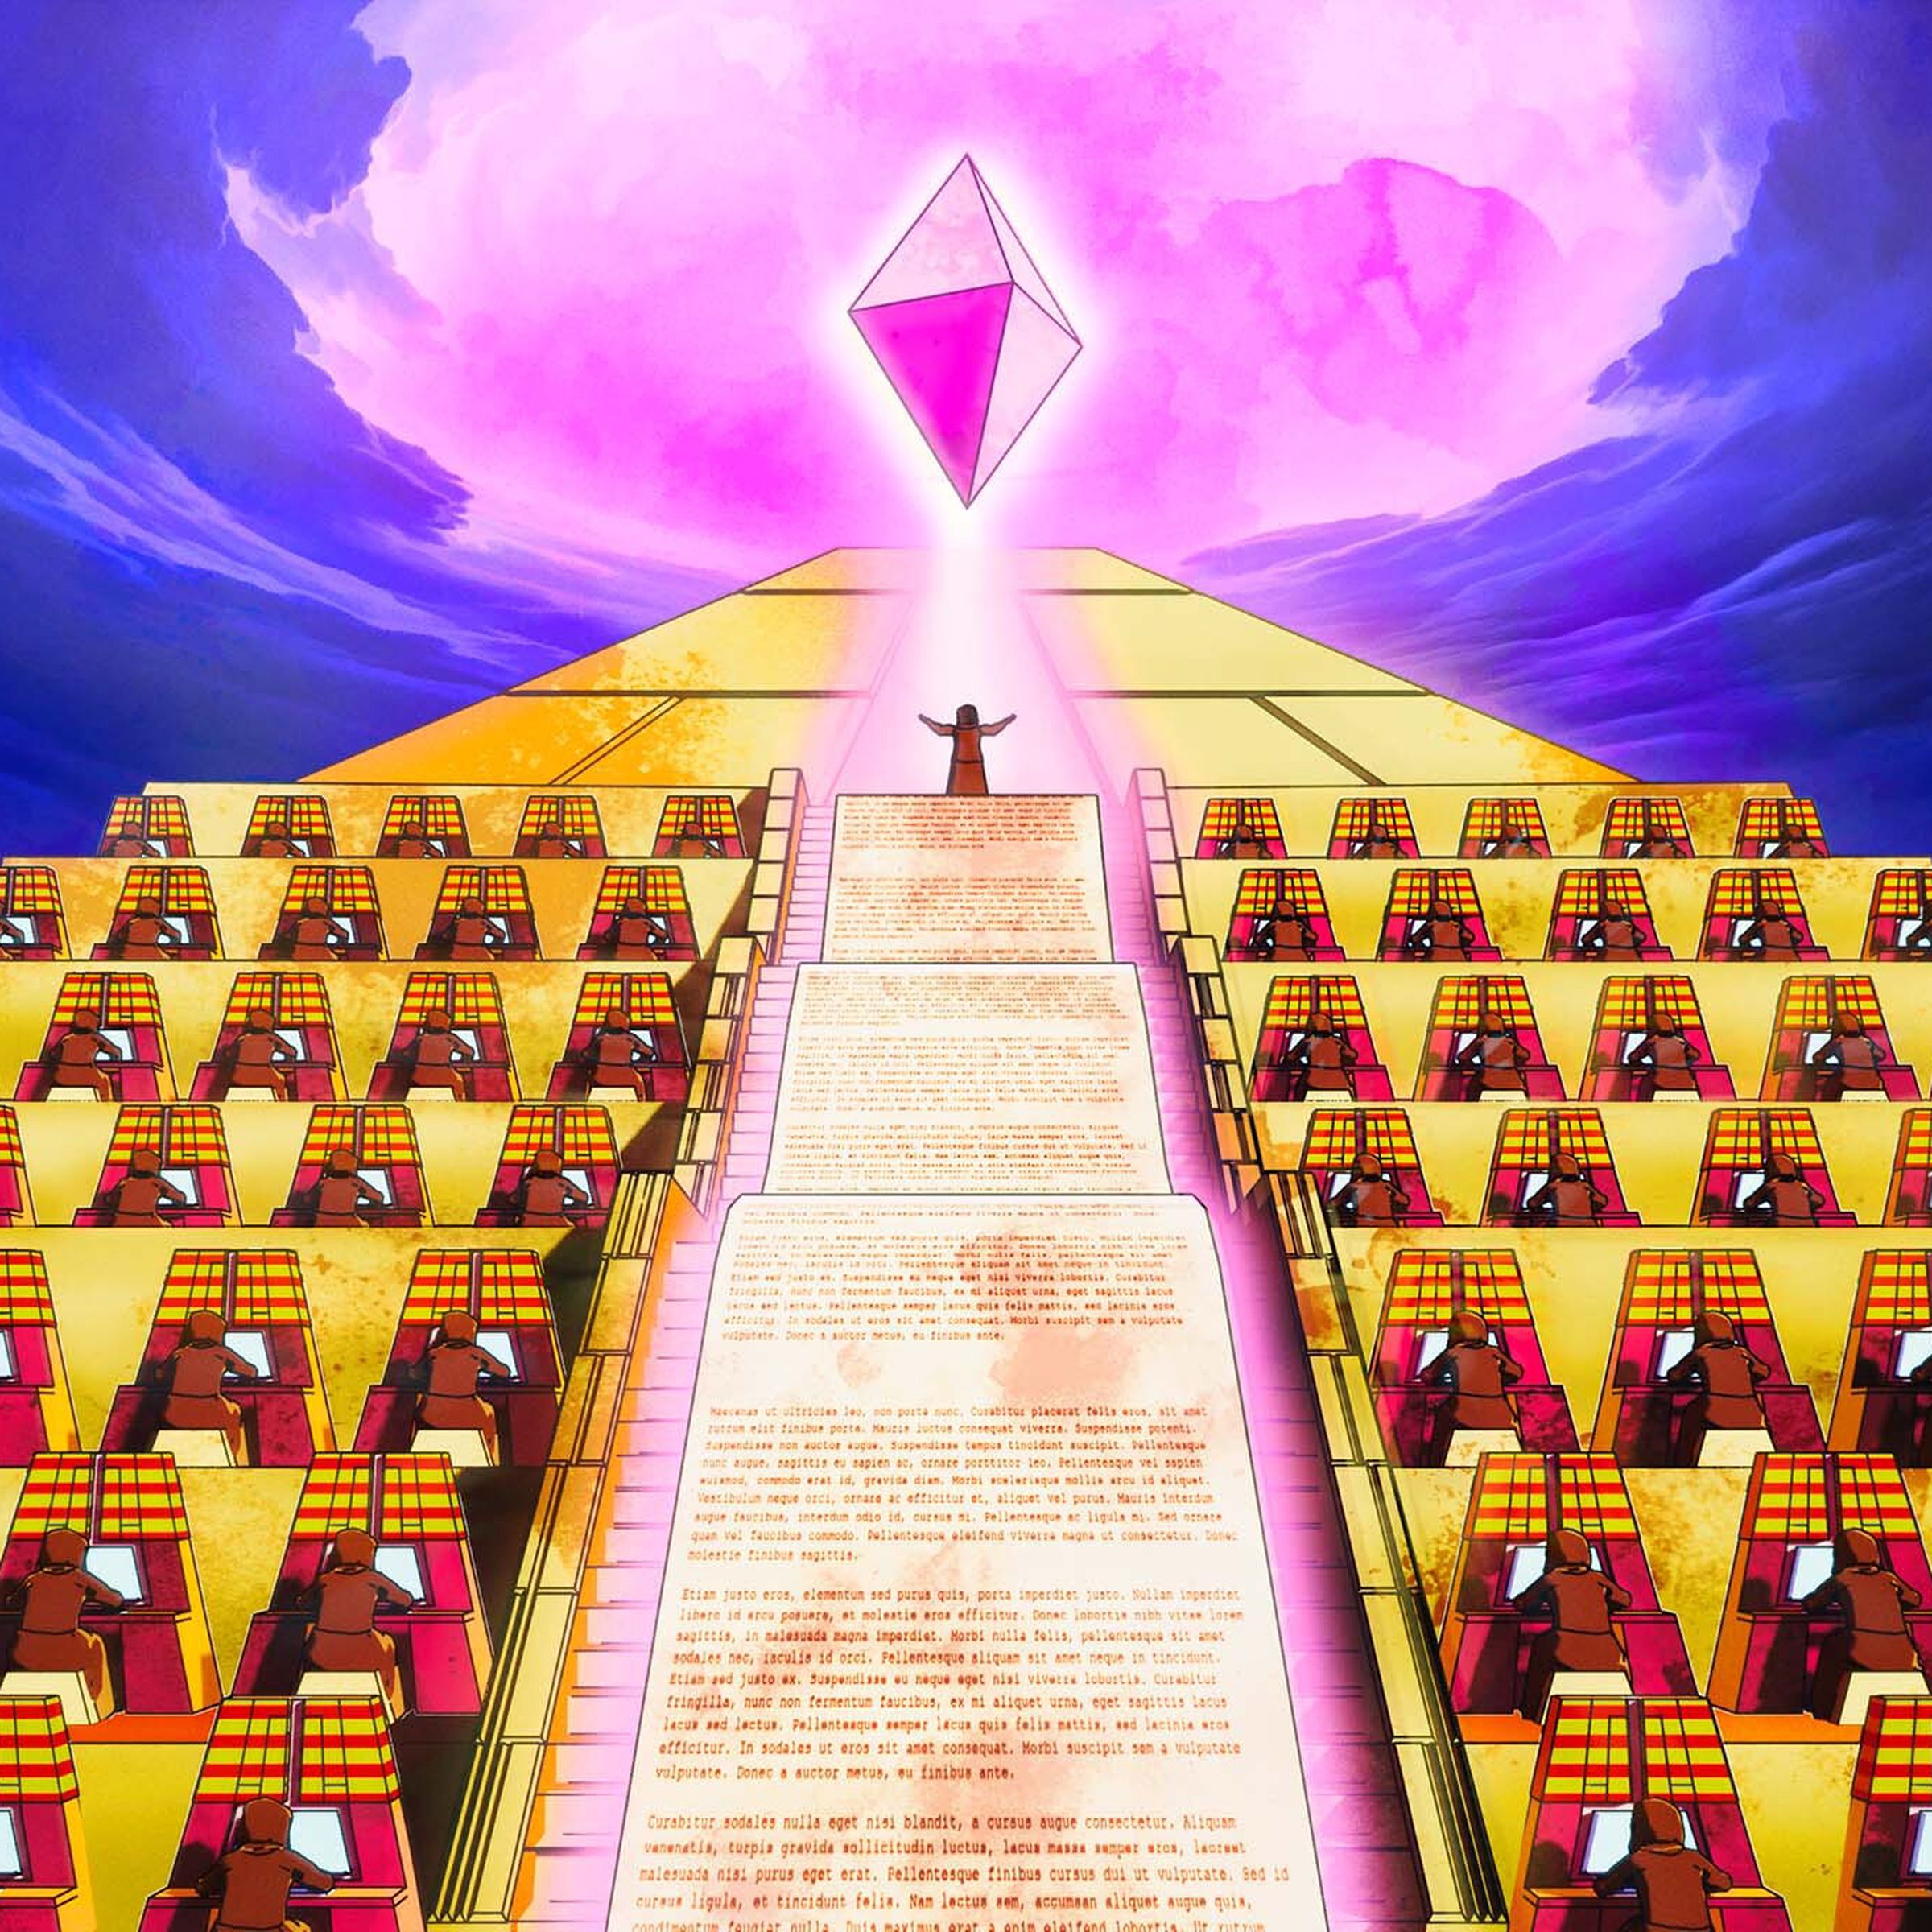 An illustration of a pyramid filled with typewriters